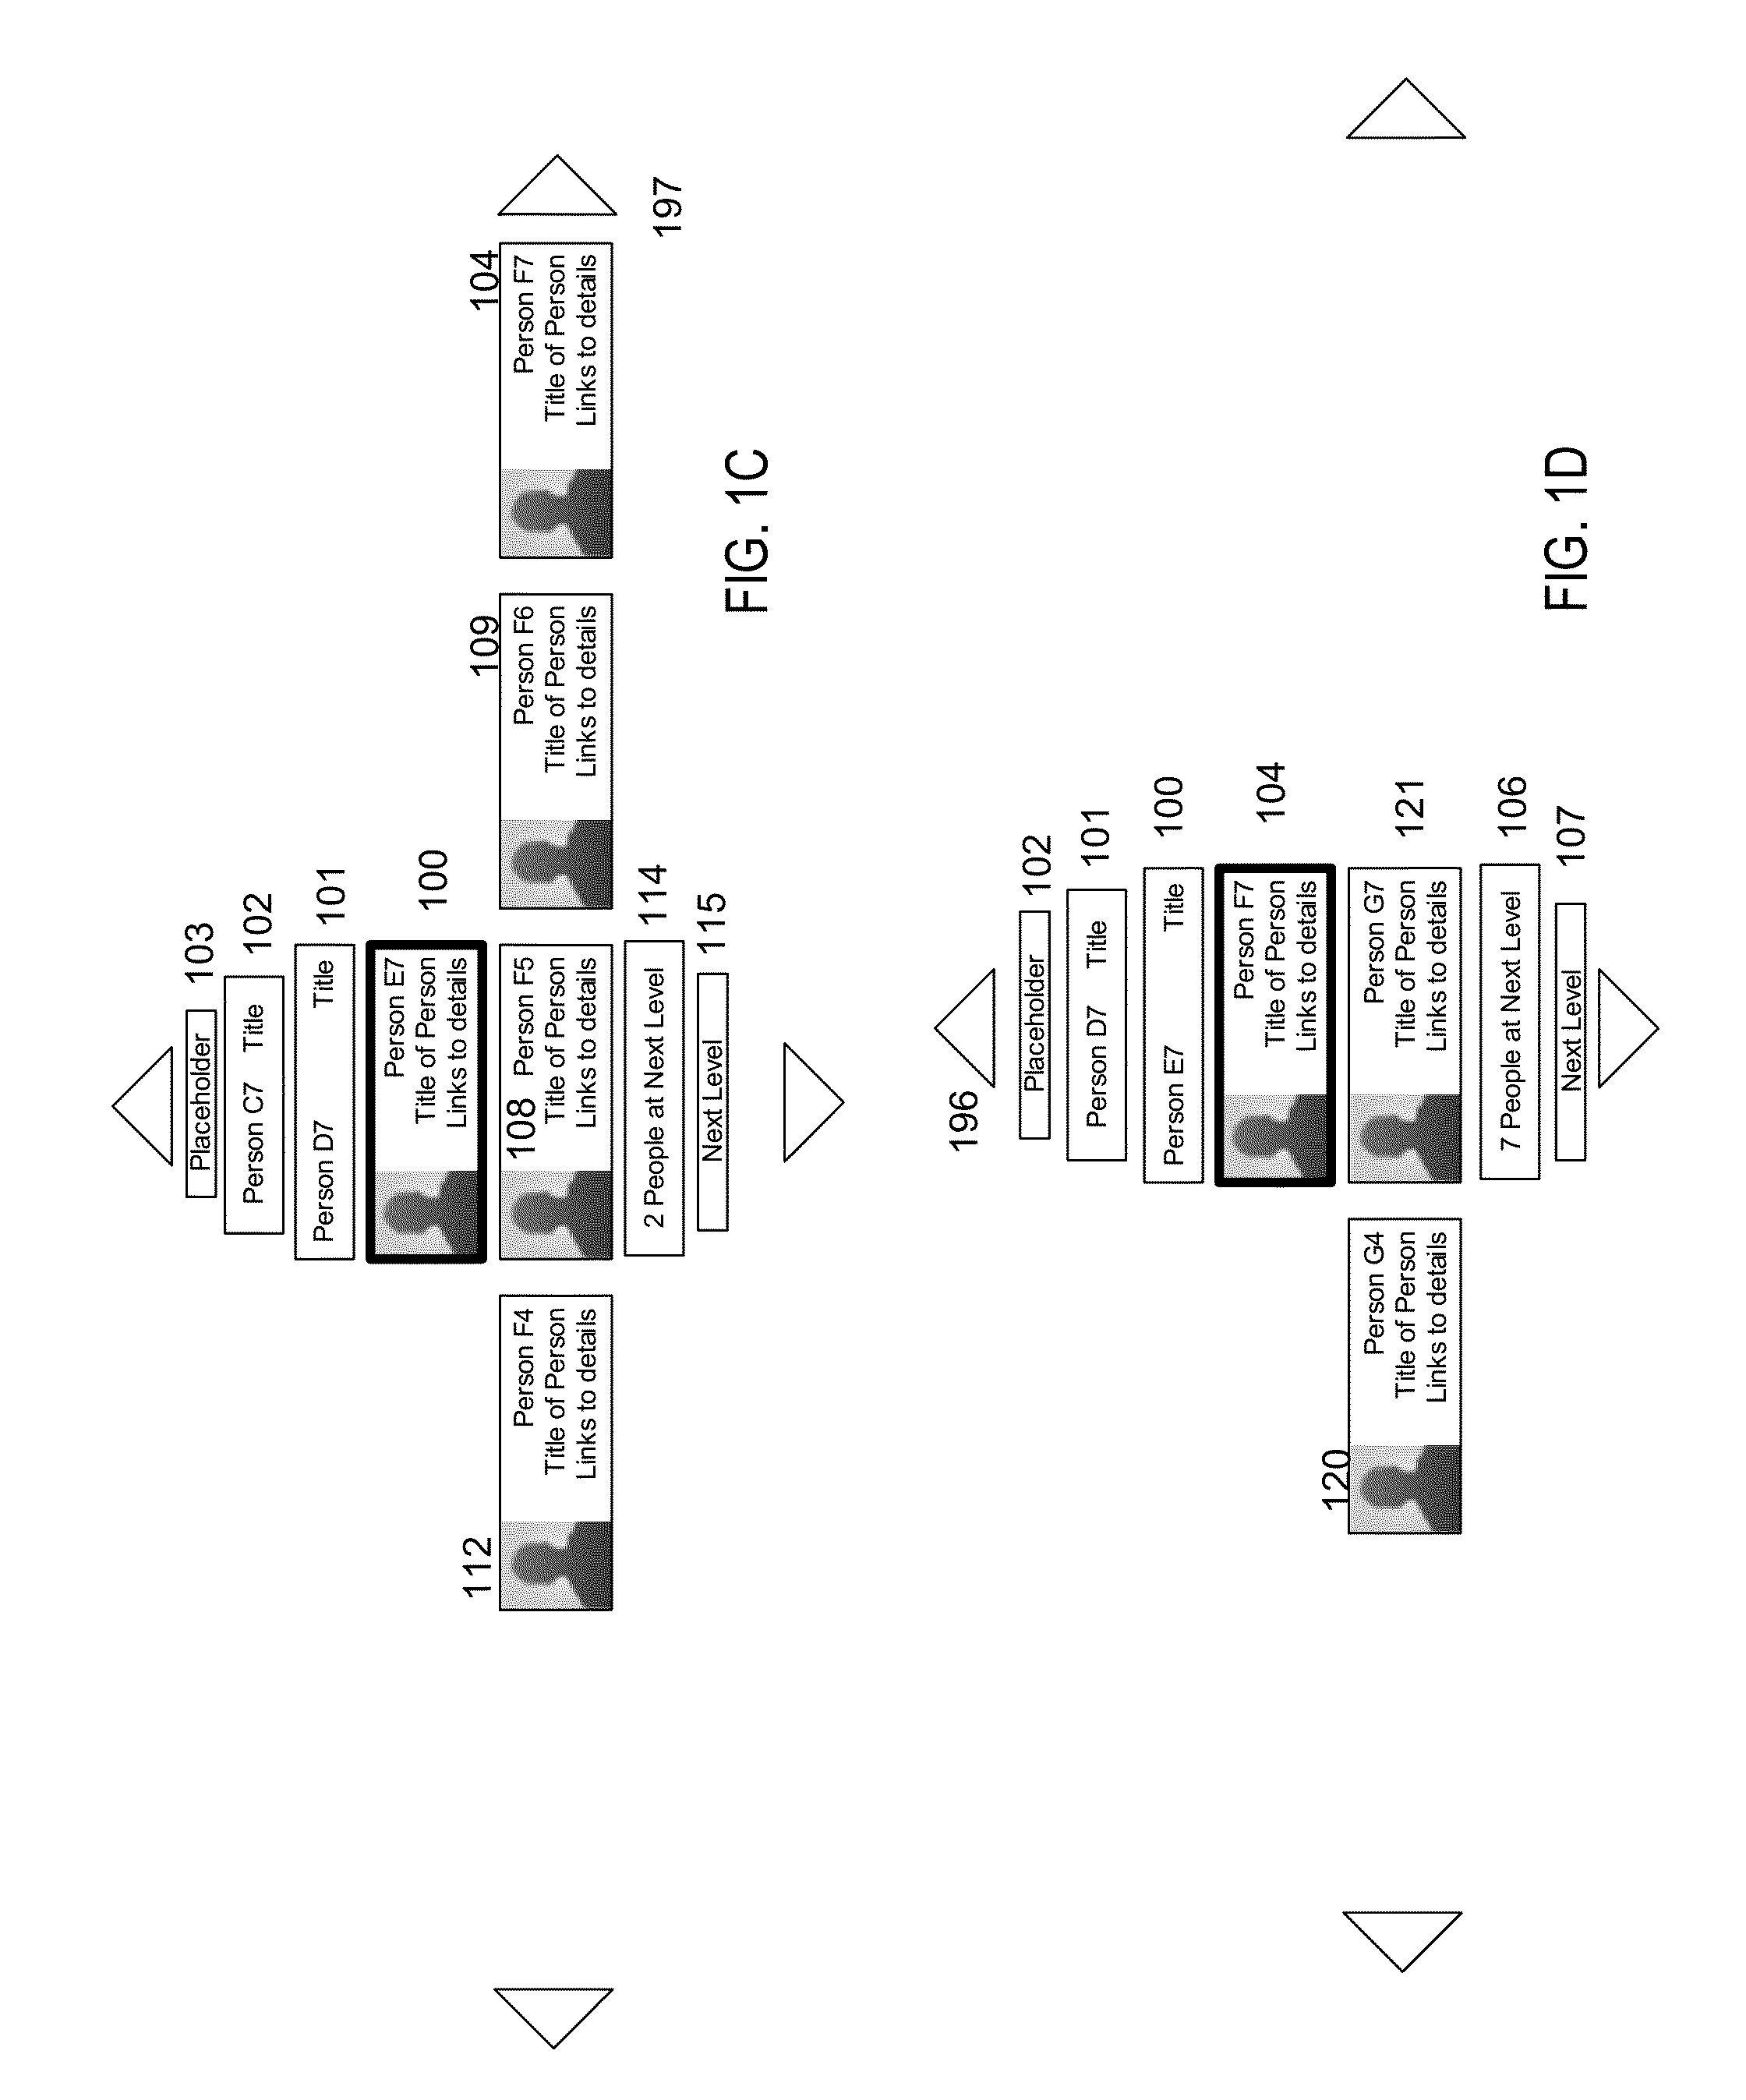 Apparatus and methods for relating intra-organization objects